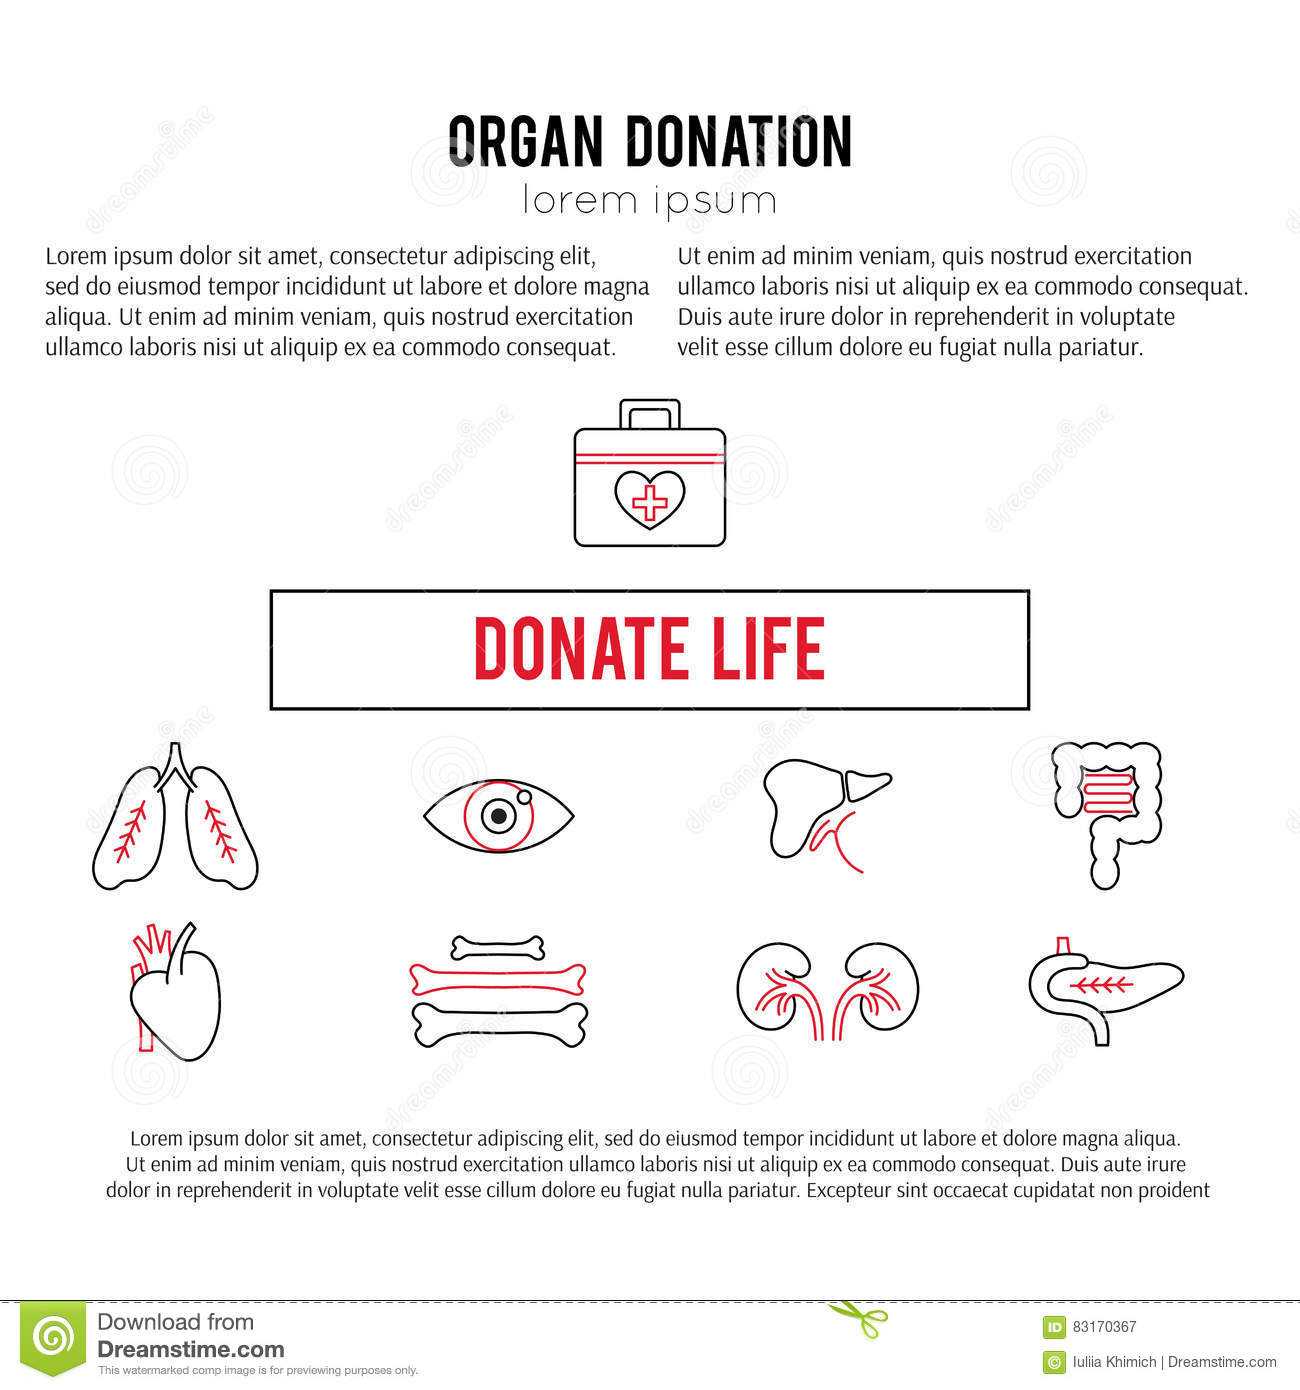 Organ Donation Template Stock Vector. Illustration Of Design For Donation Cards Template